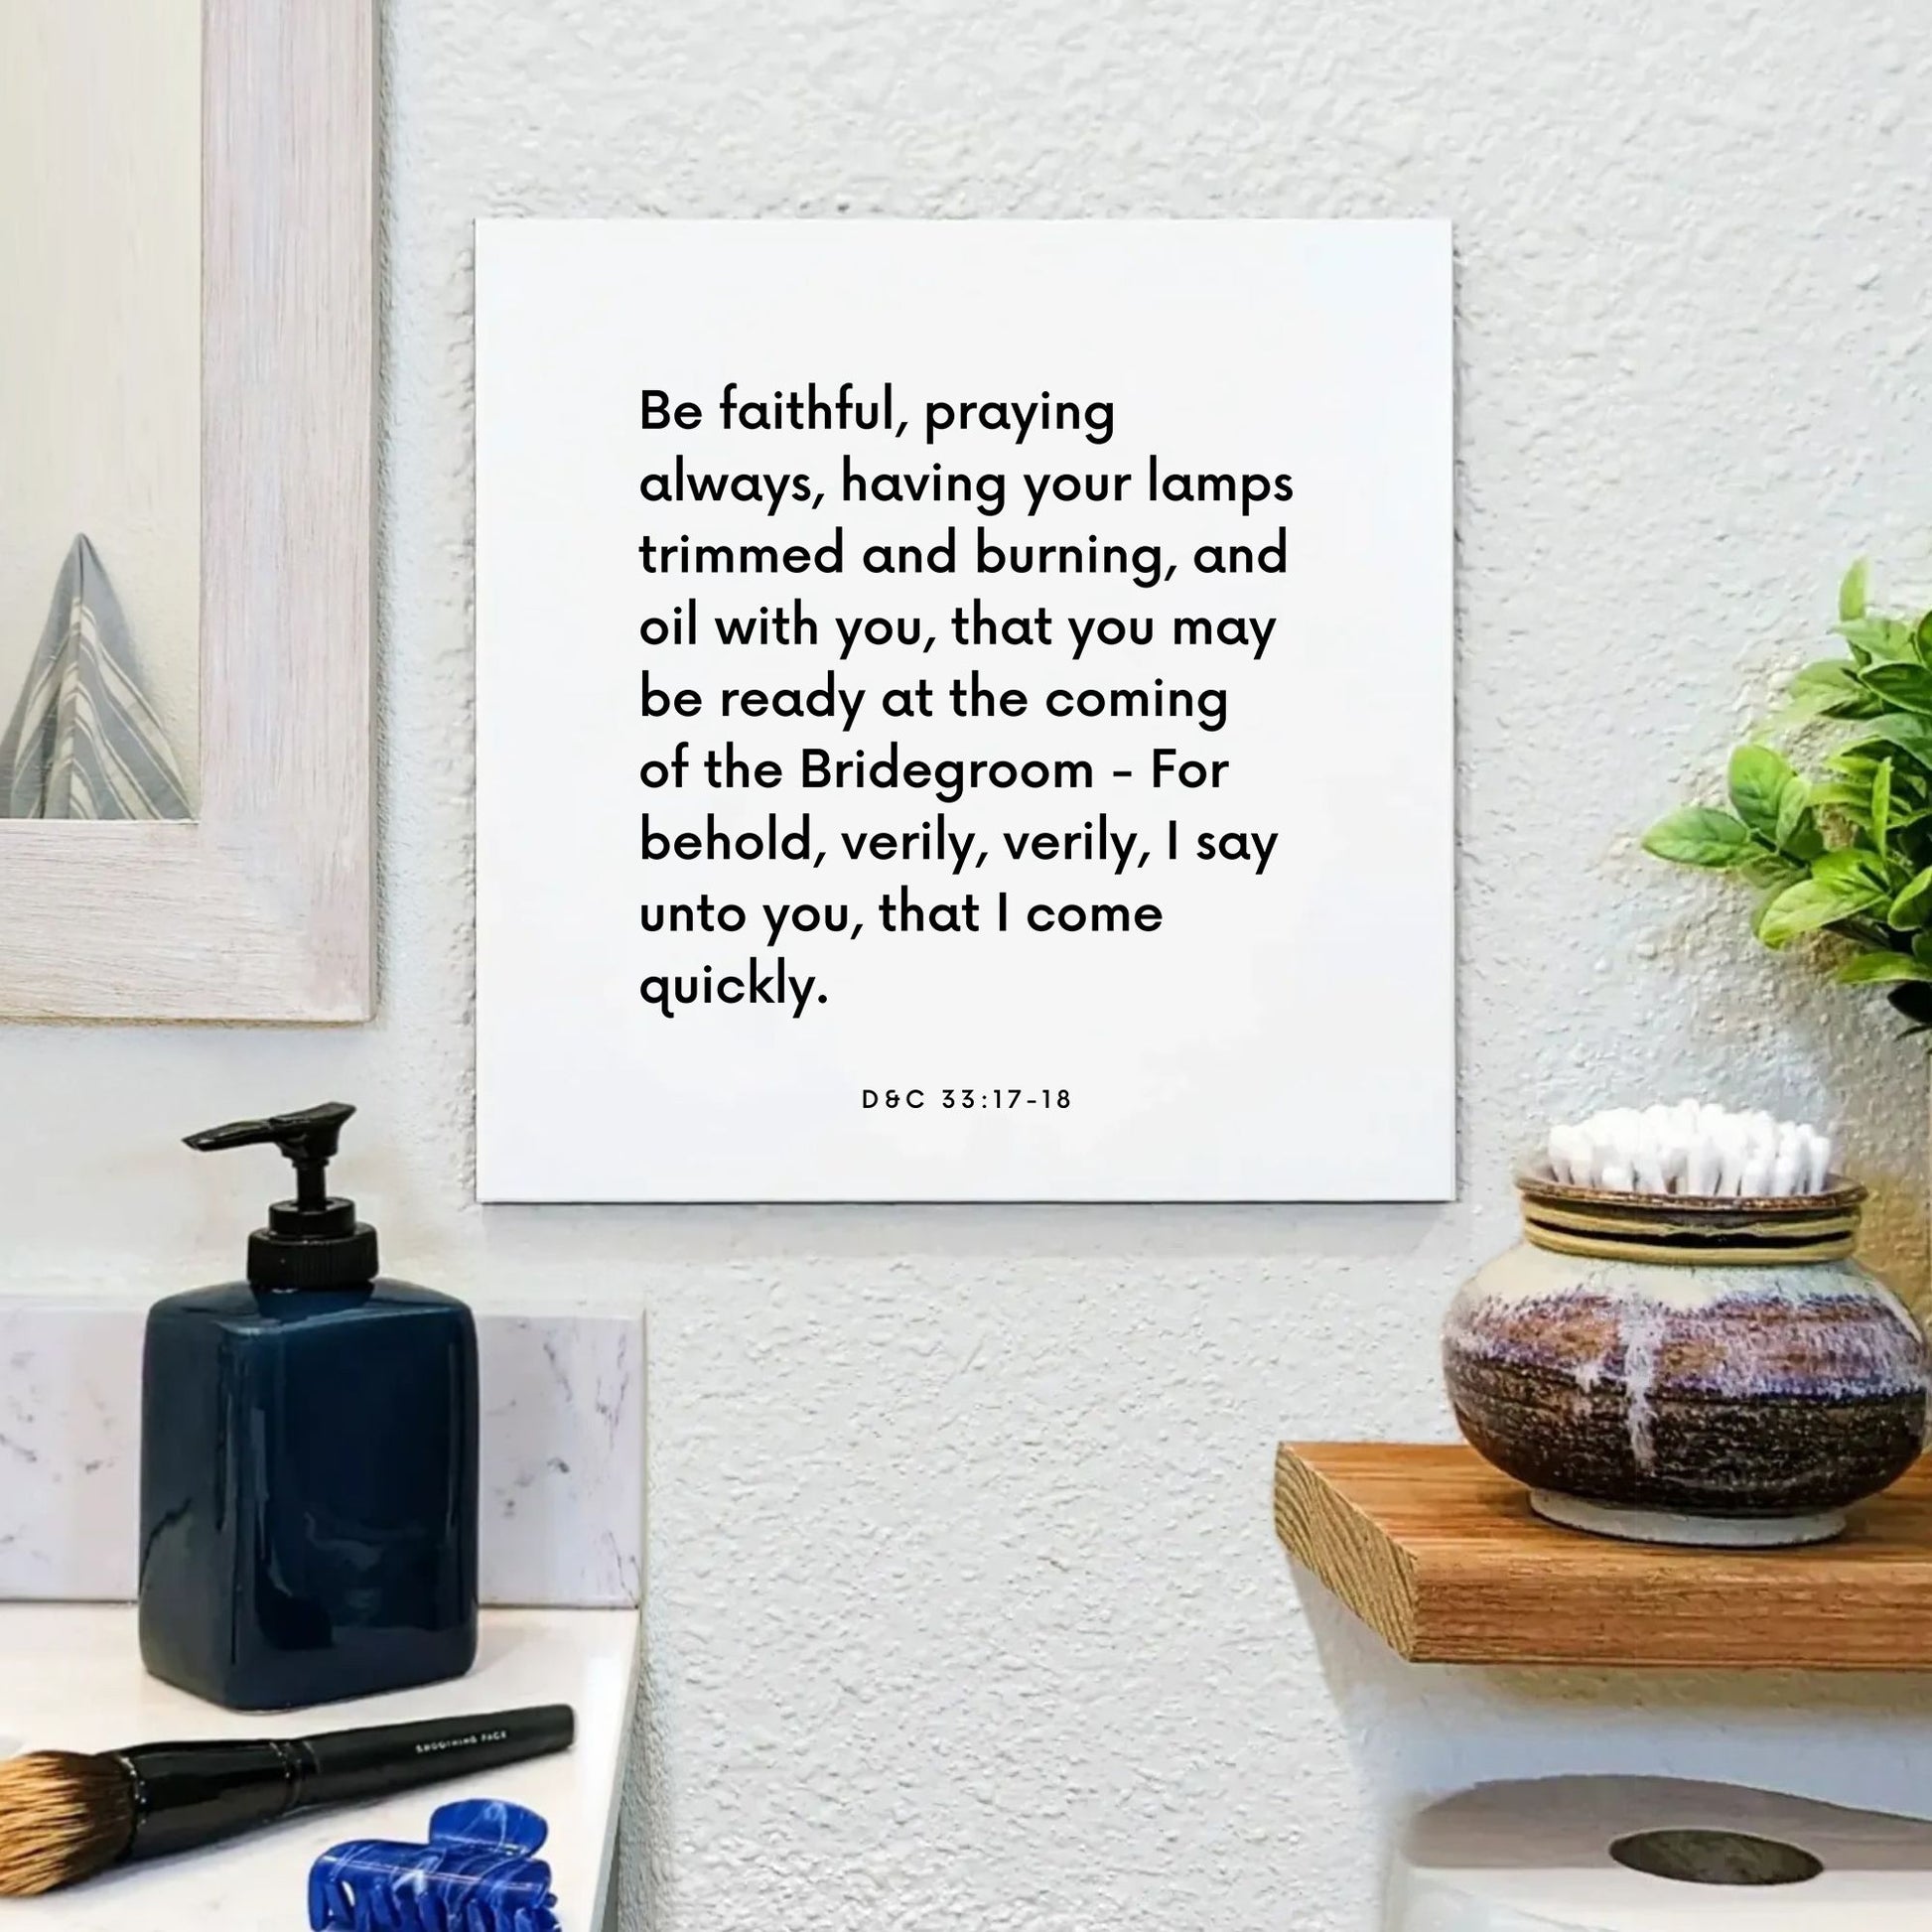 Bathroom mouting of the scripture tile for D&C 33:17-18 - "Be faithful, praying always, having your lamps trimmed"